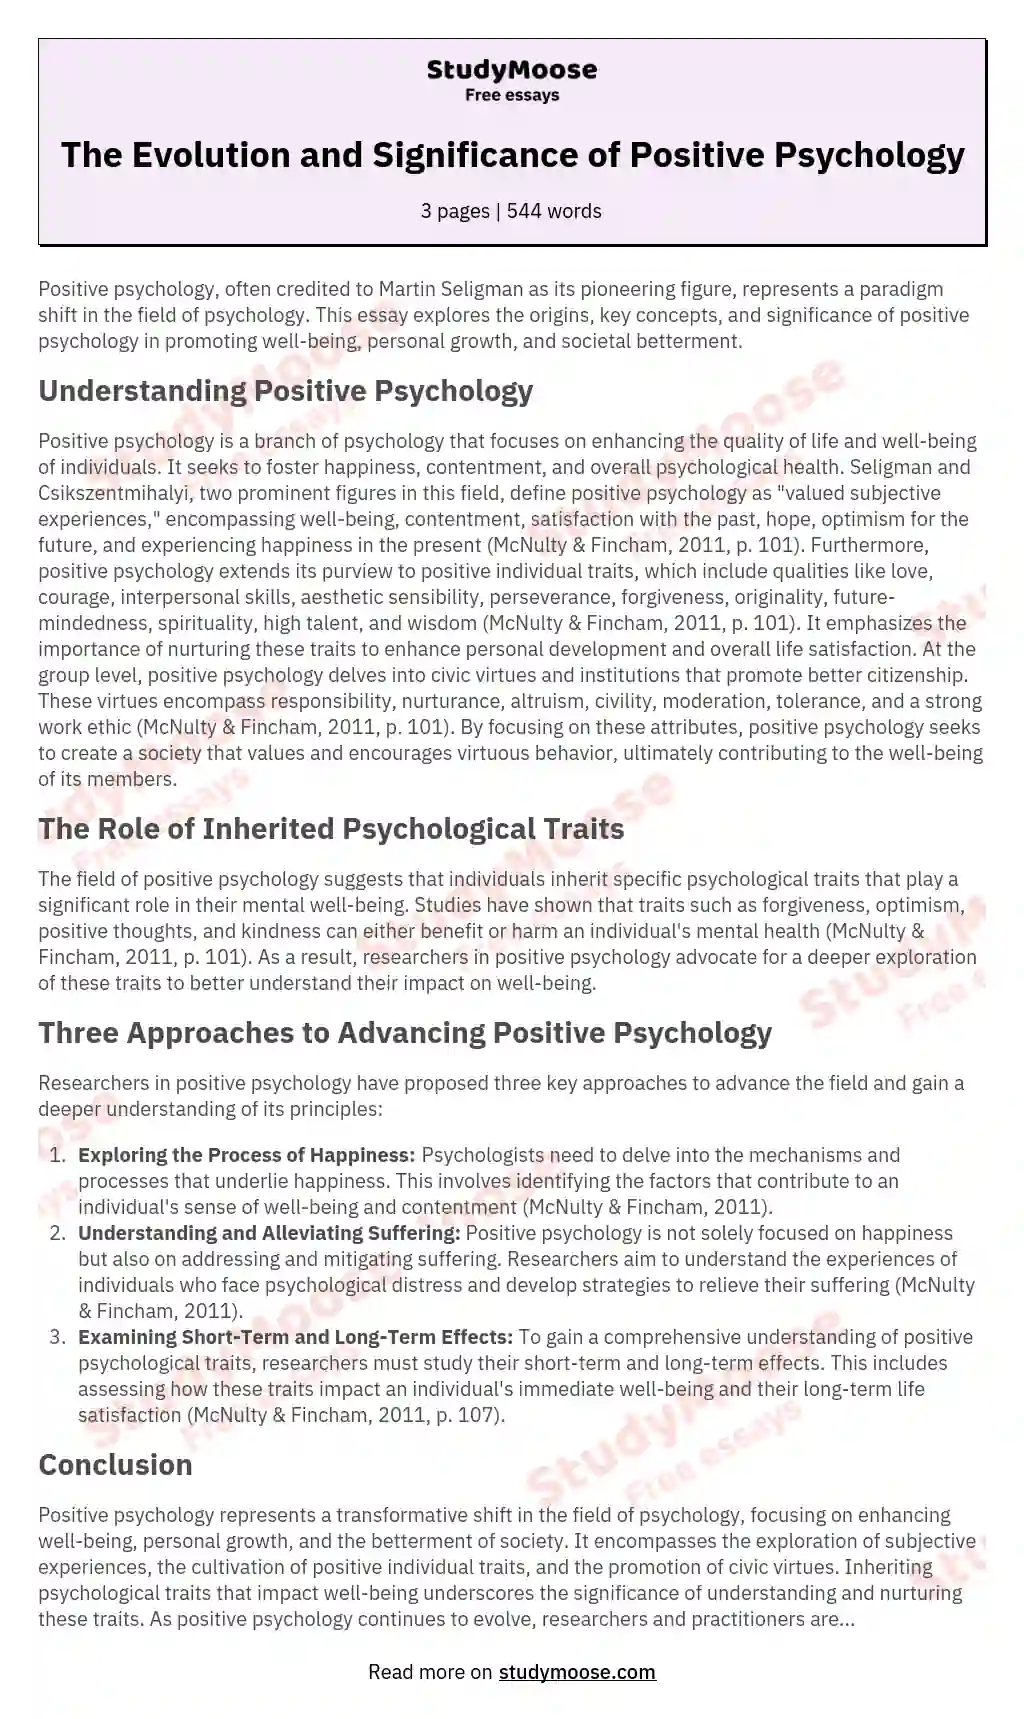 The Evolution and Significance of Positive Psychology essay